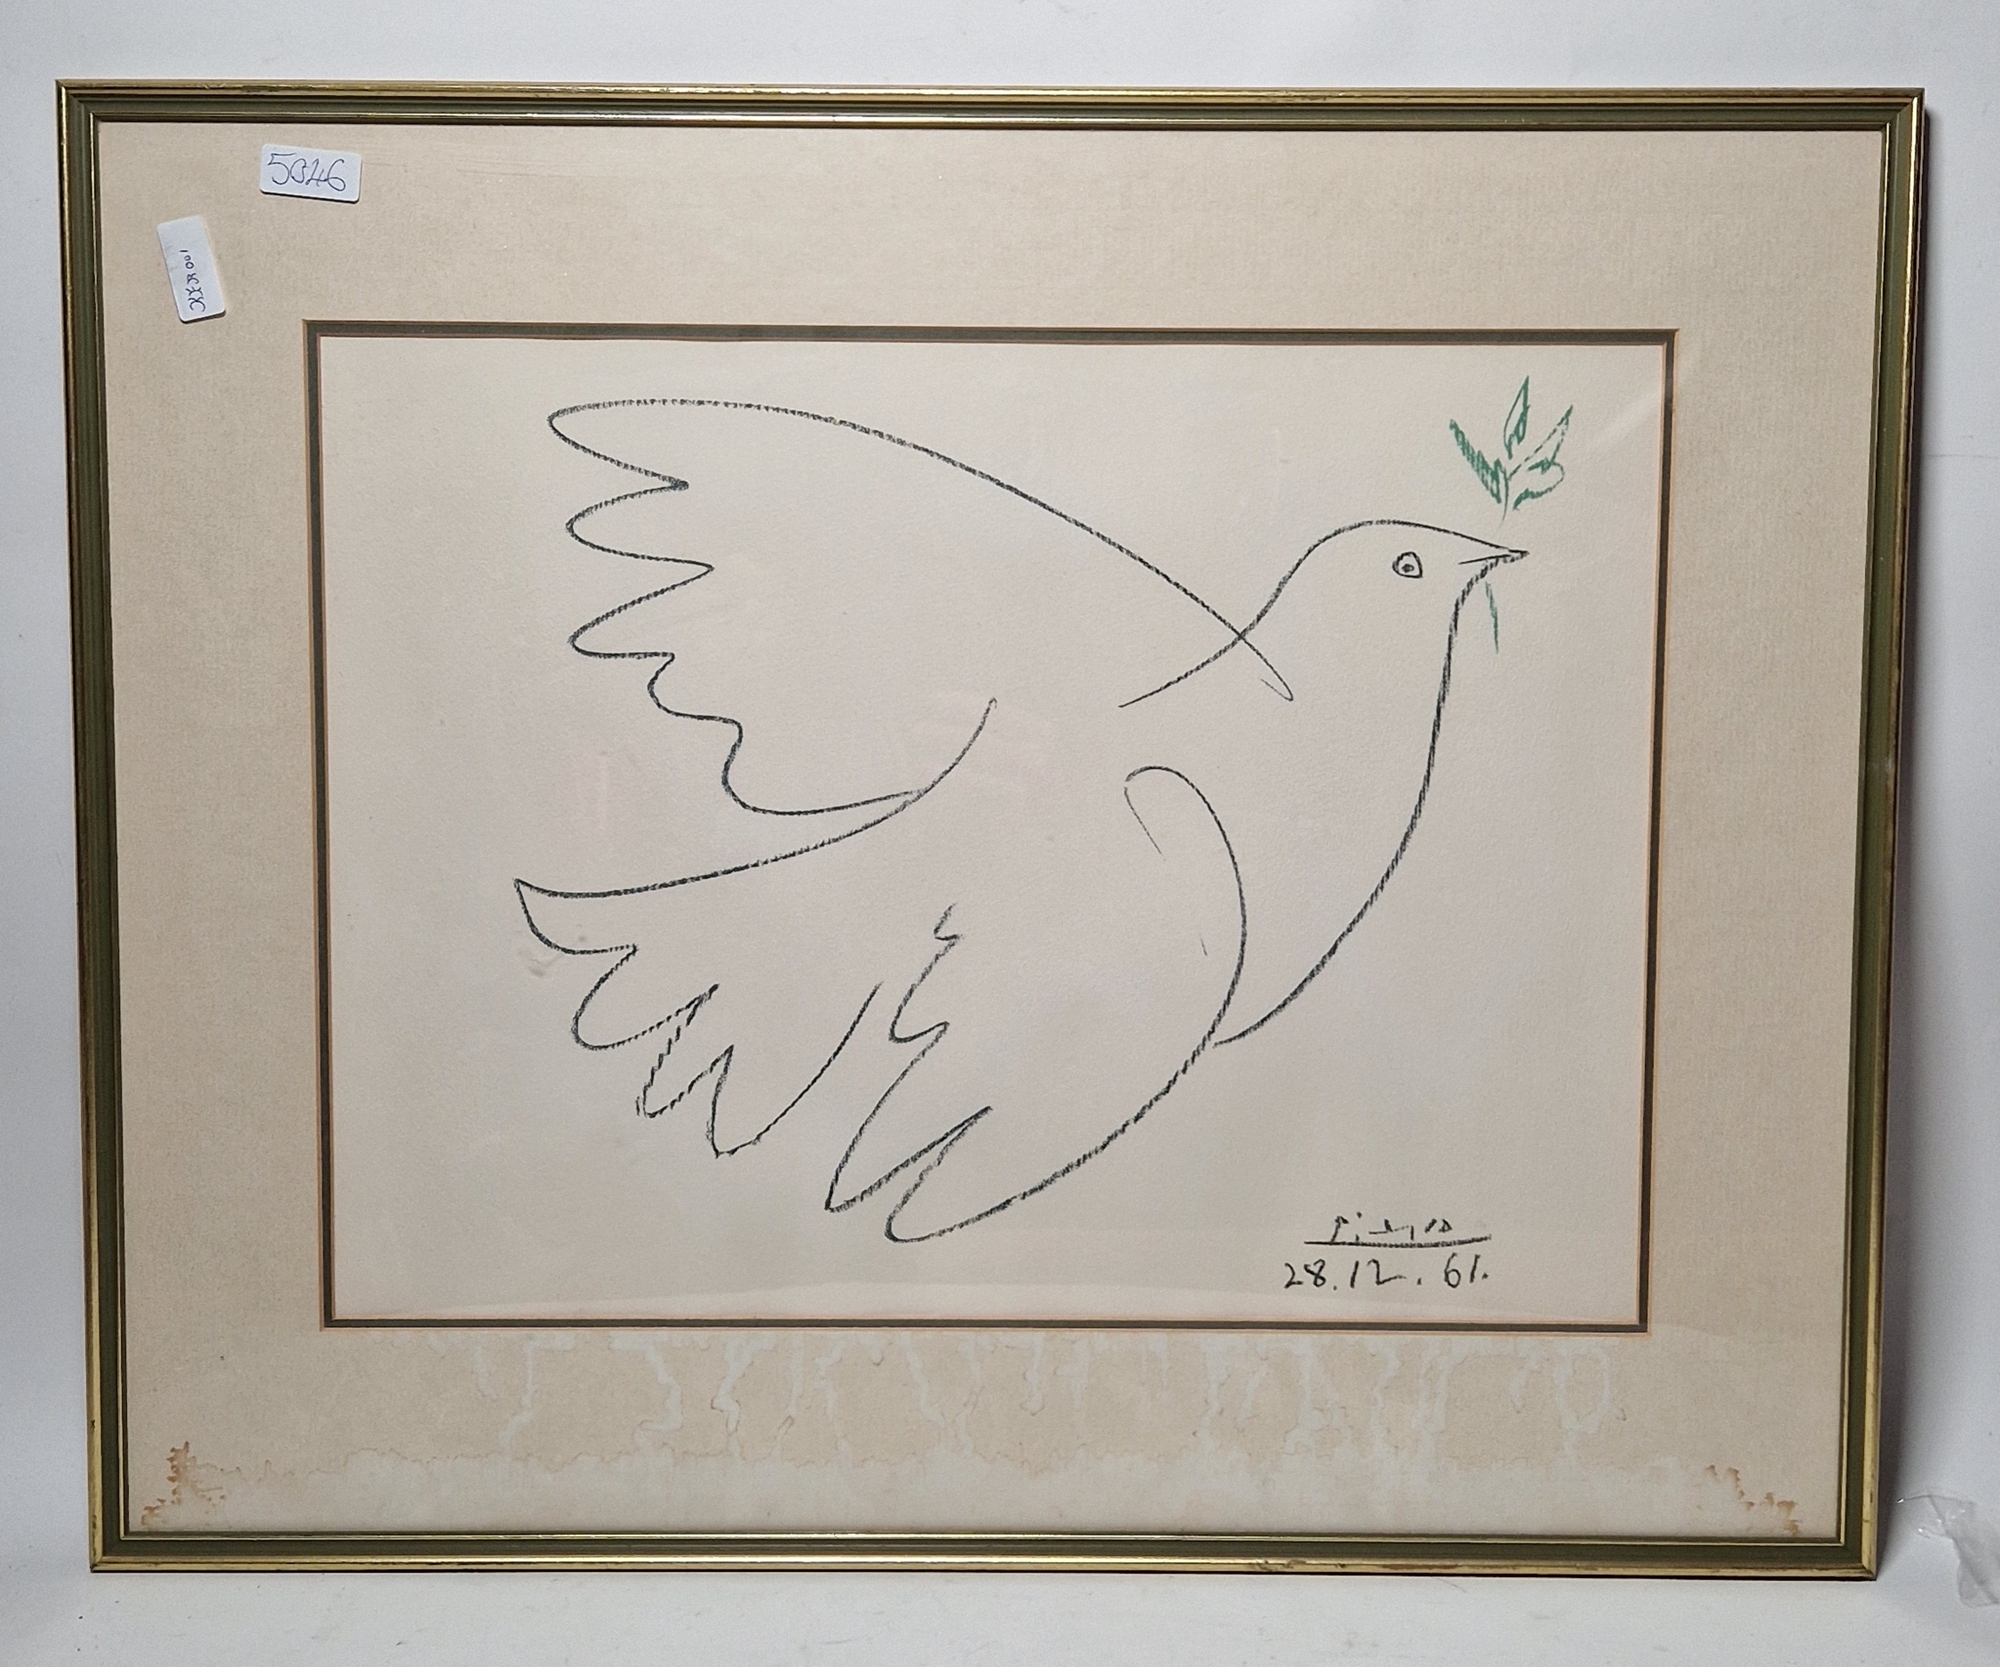 After Pablo Picasso (1881-1973) Offset lithograph "Dove of Peace", open edition, signed and dated - Image 2 of 4